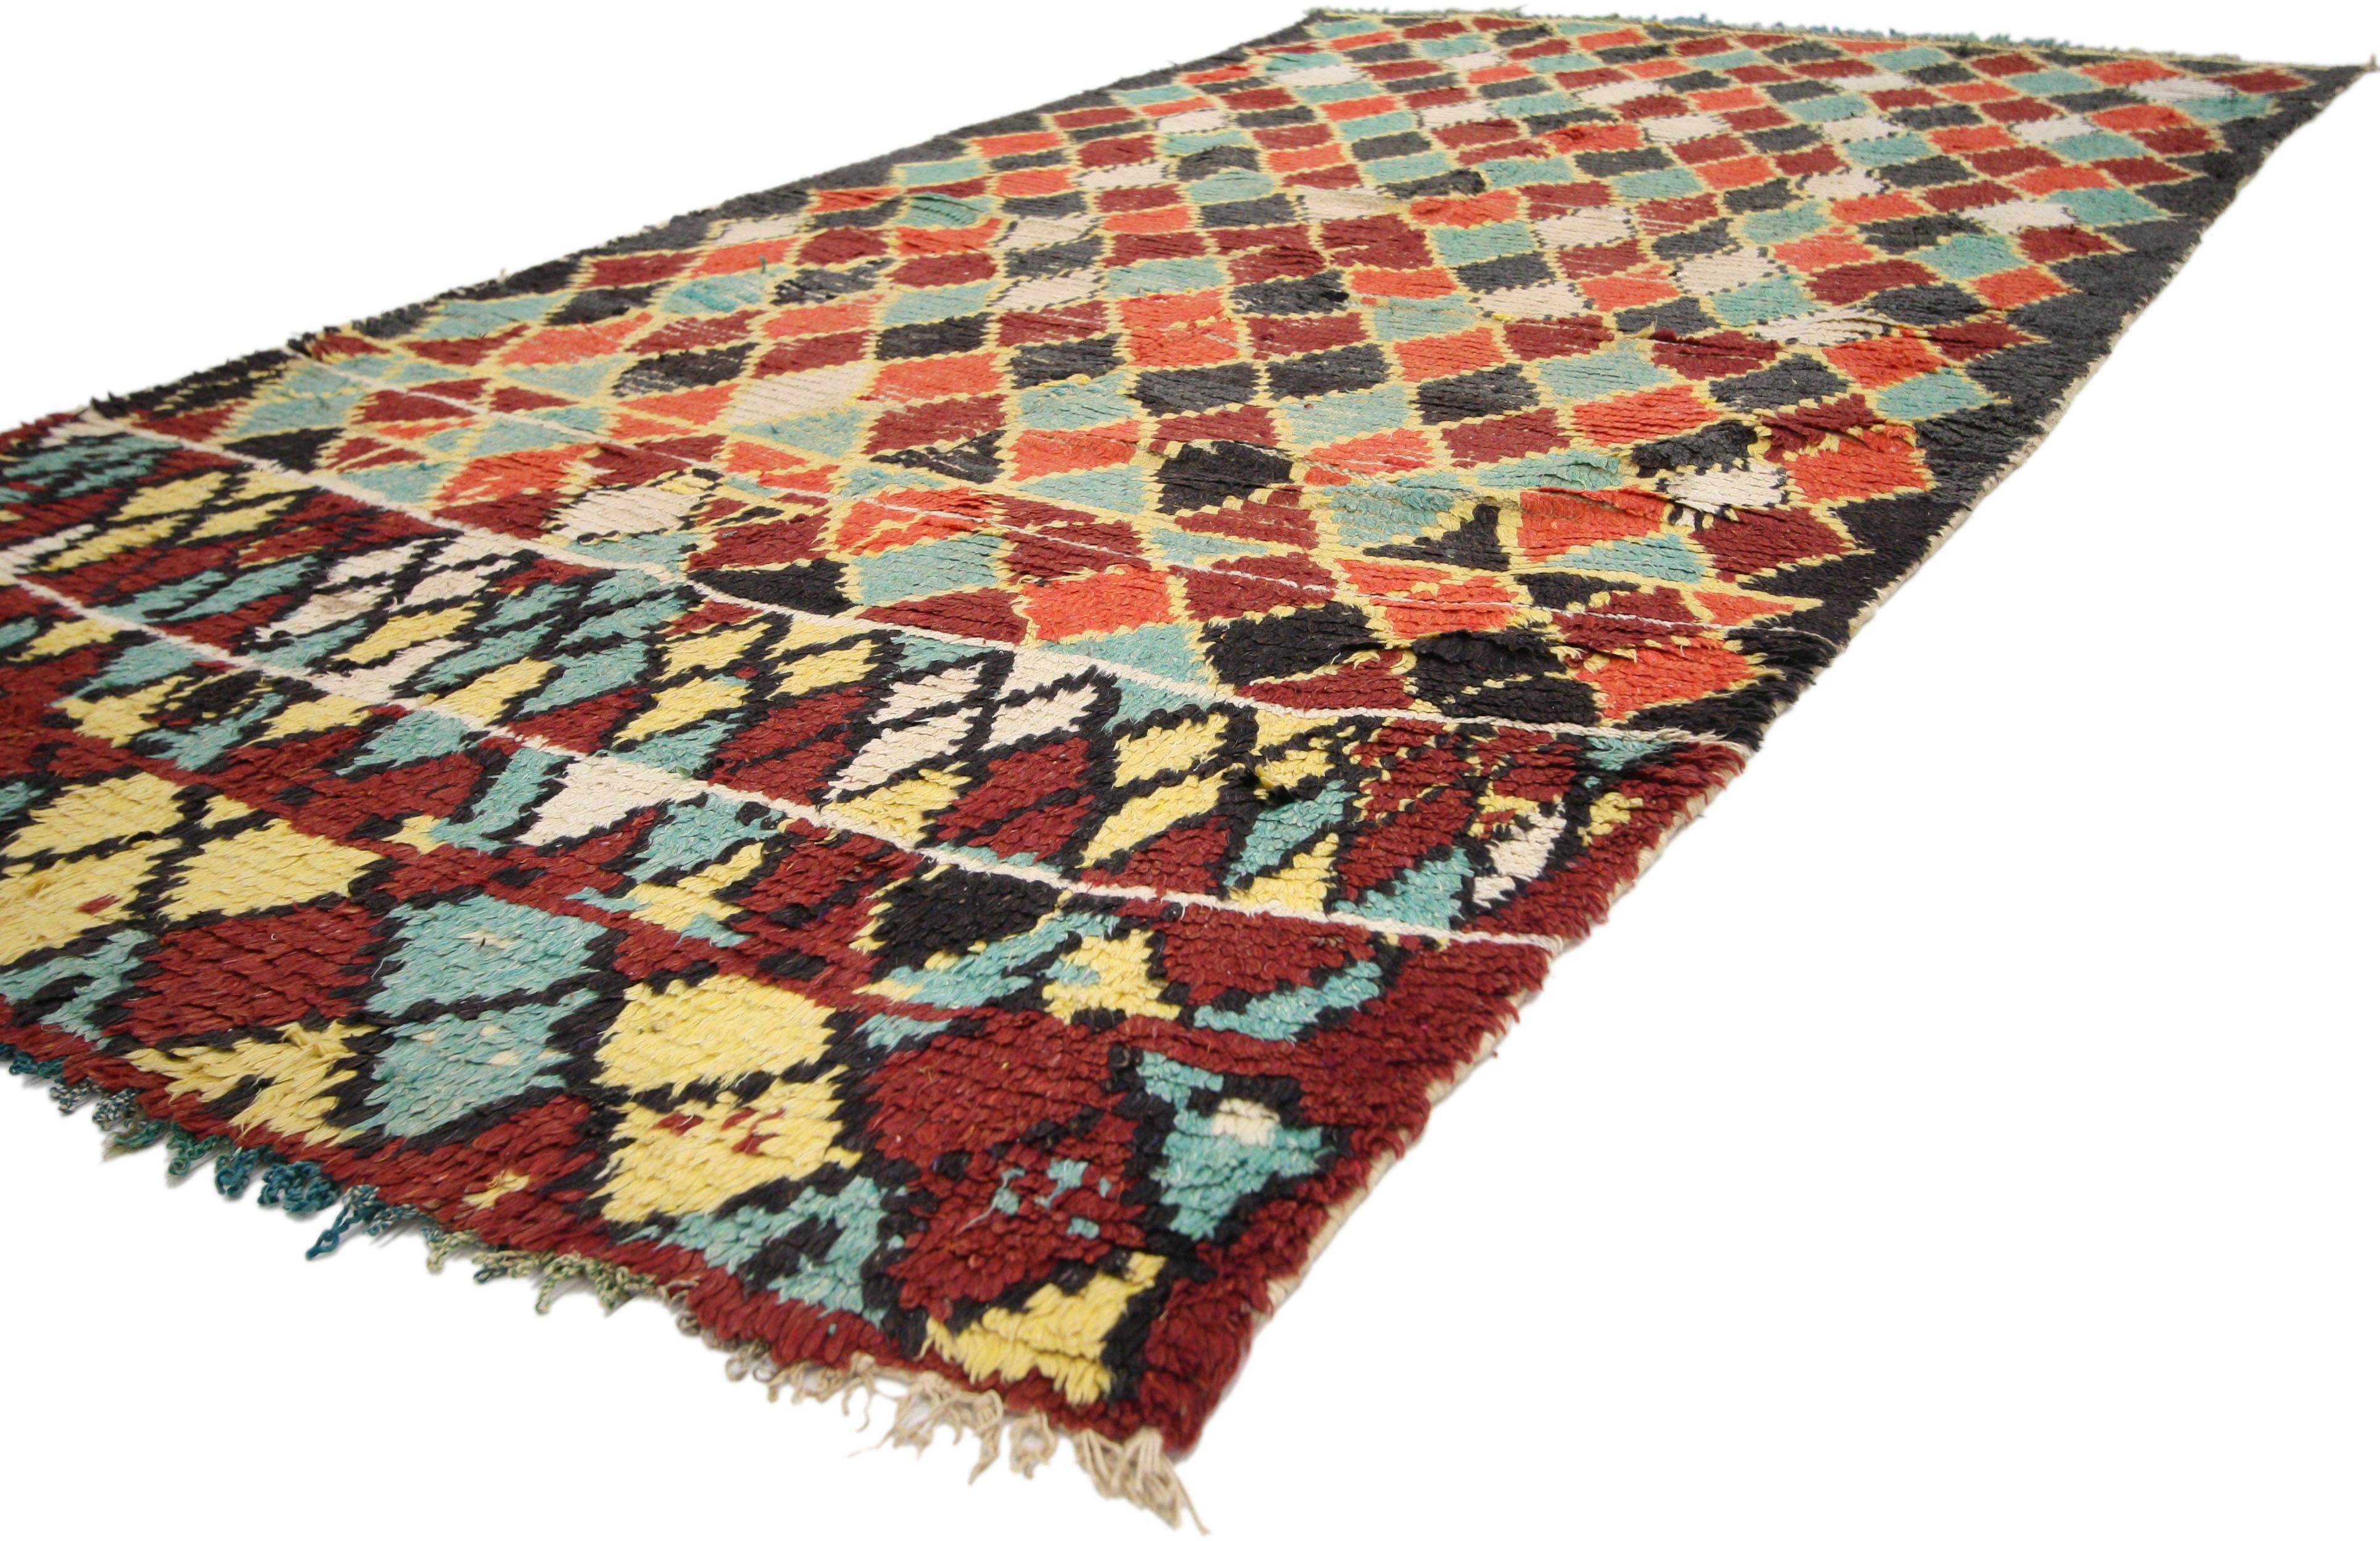 74528 Vintage Berber Moroccan Rug with Modern Tribal Style. With its all-over lozenge pattern and gorgeous color scheme, this vintage Moroccan rug will add much-needed color, texture and warmth to modern decor and contemporary interiors. Featuring